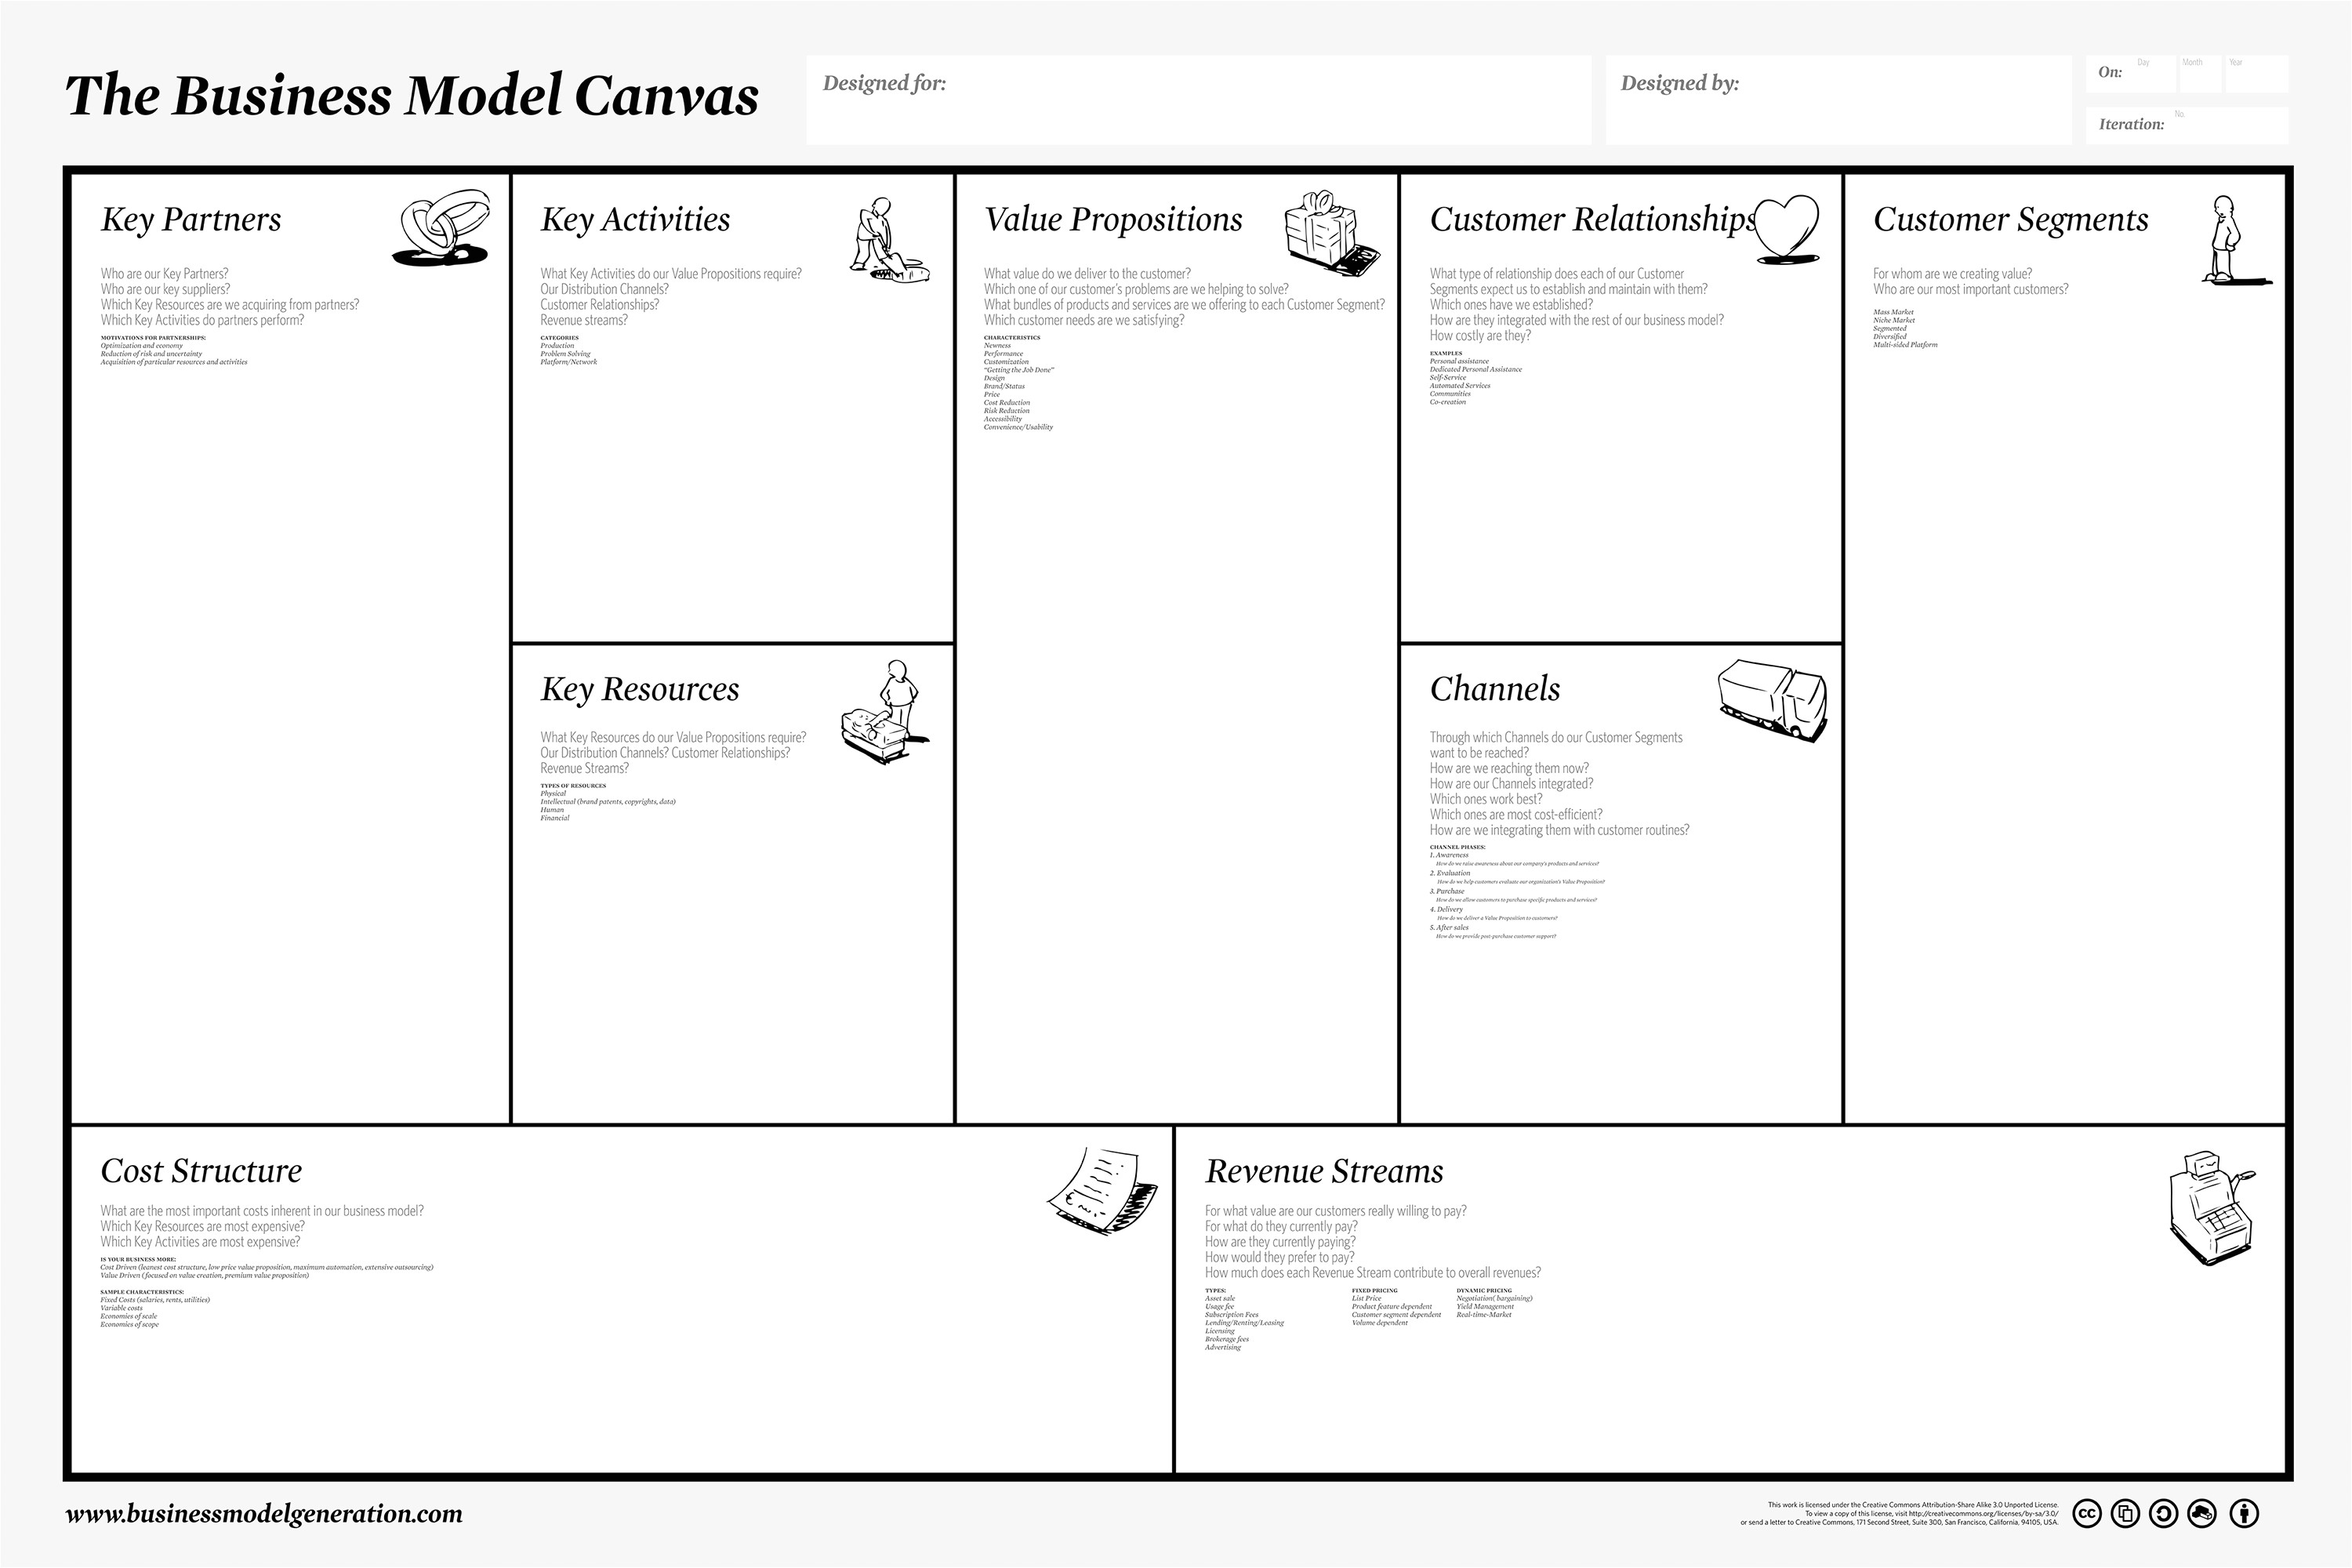 business model template